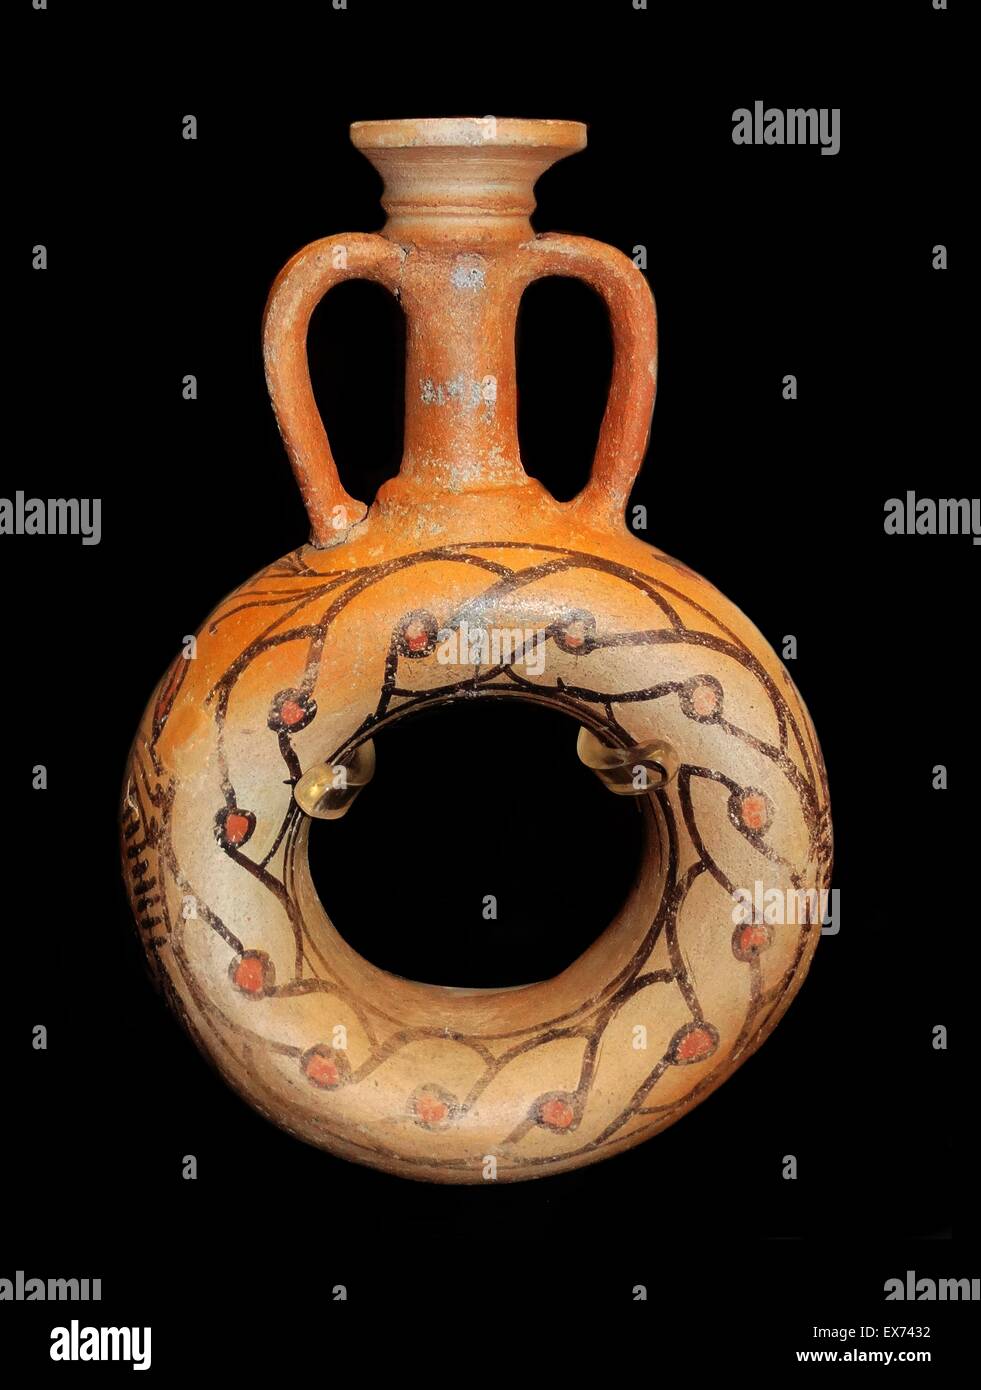 Ring flask with guilloche patterns and floral motifs. This is the only known example from the Meroitic period. Meroitic relates to the kingdom of Meroe in pre-Islamic Sudan. approximately 300 BC to 400 AD. Stock Photo